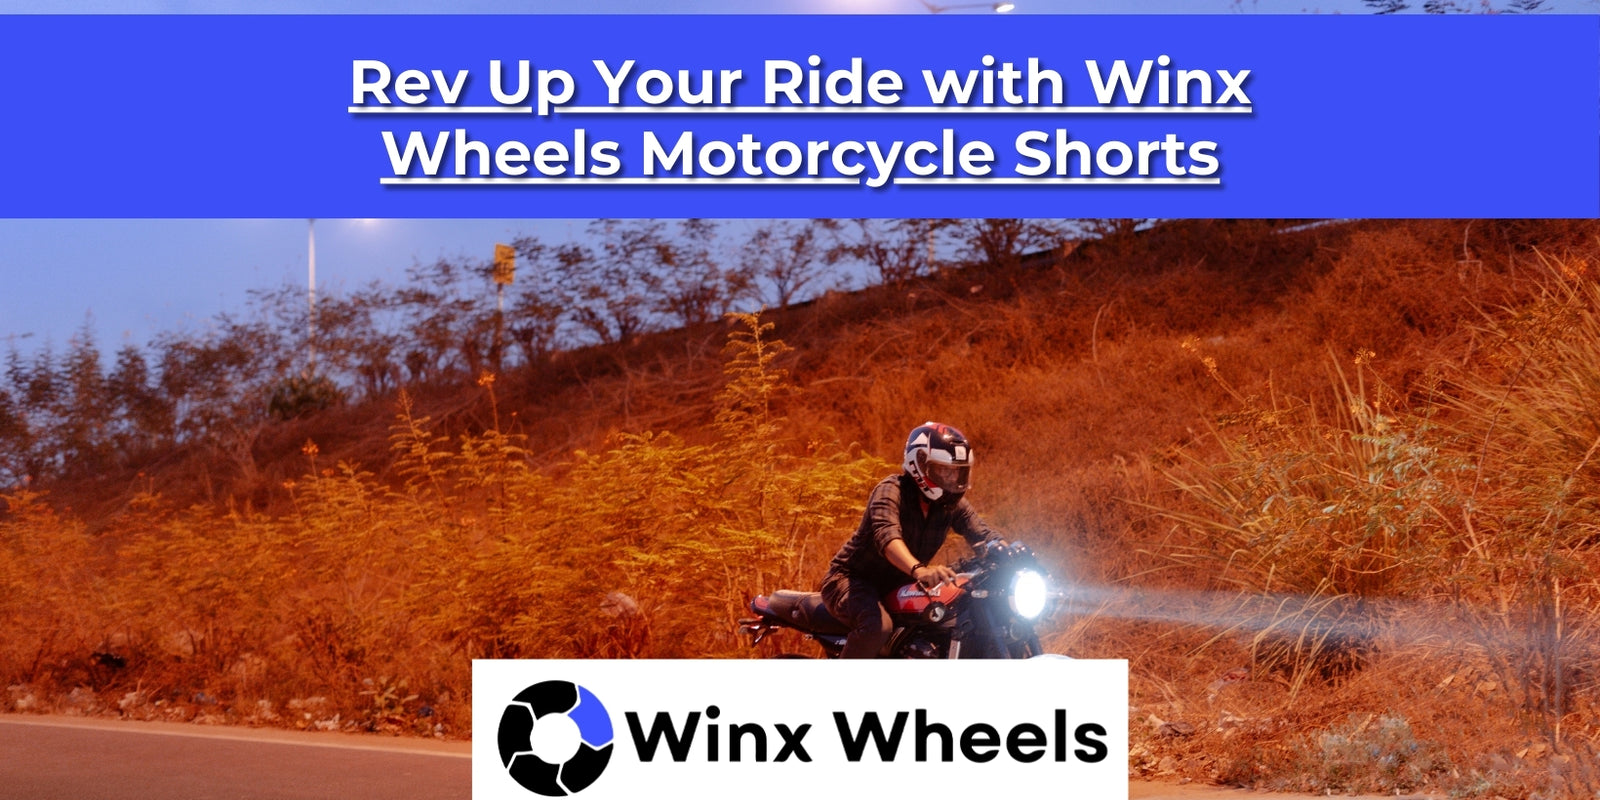 Rev Up Your Style with Winx Wheels Motorcycle Shorts